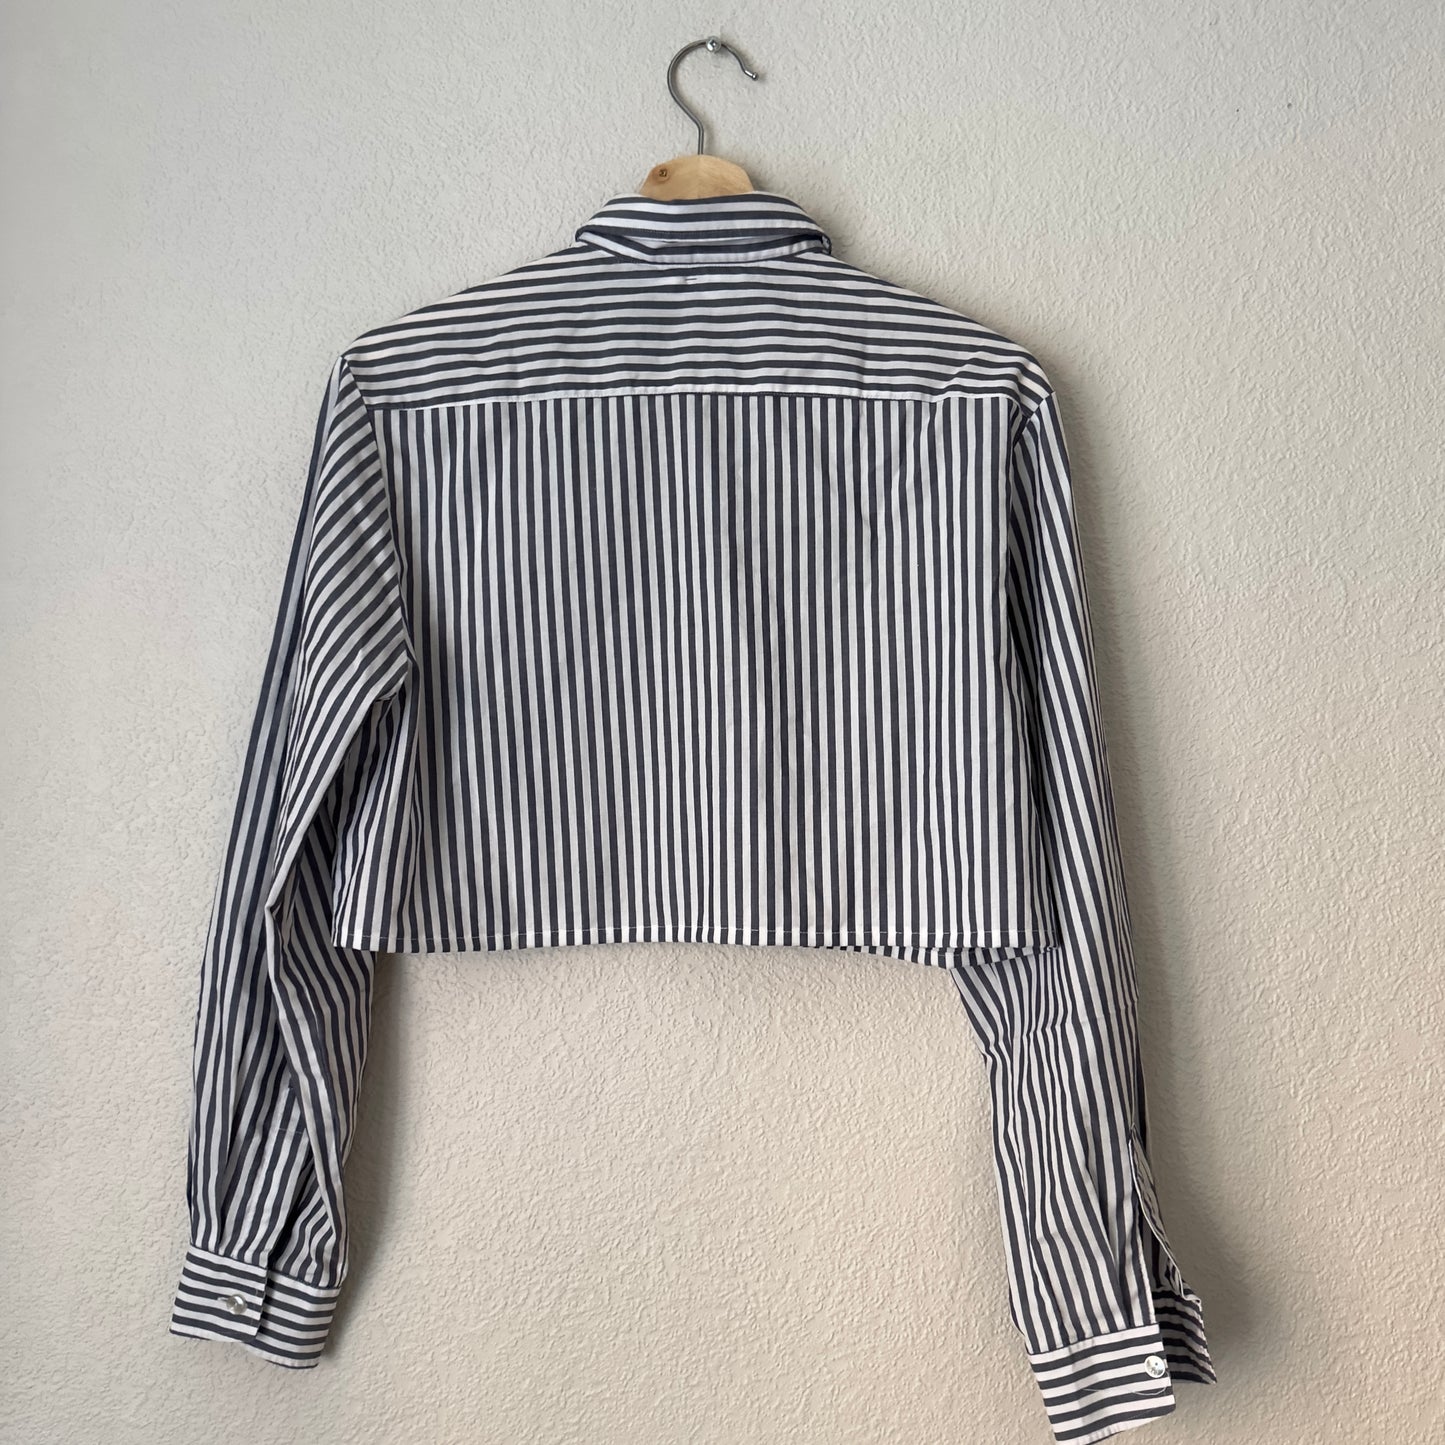 Upcycled Shirt 5 - Cotton, Striped